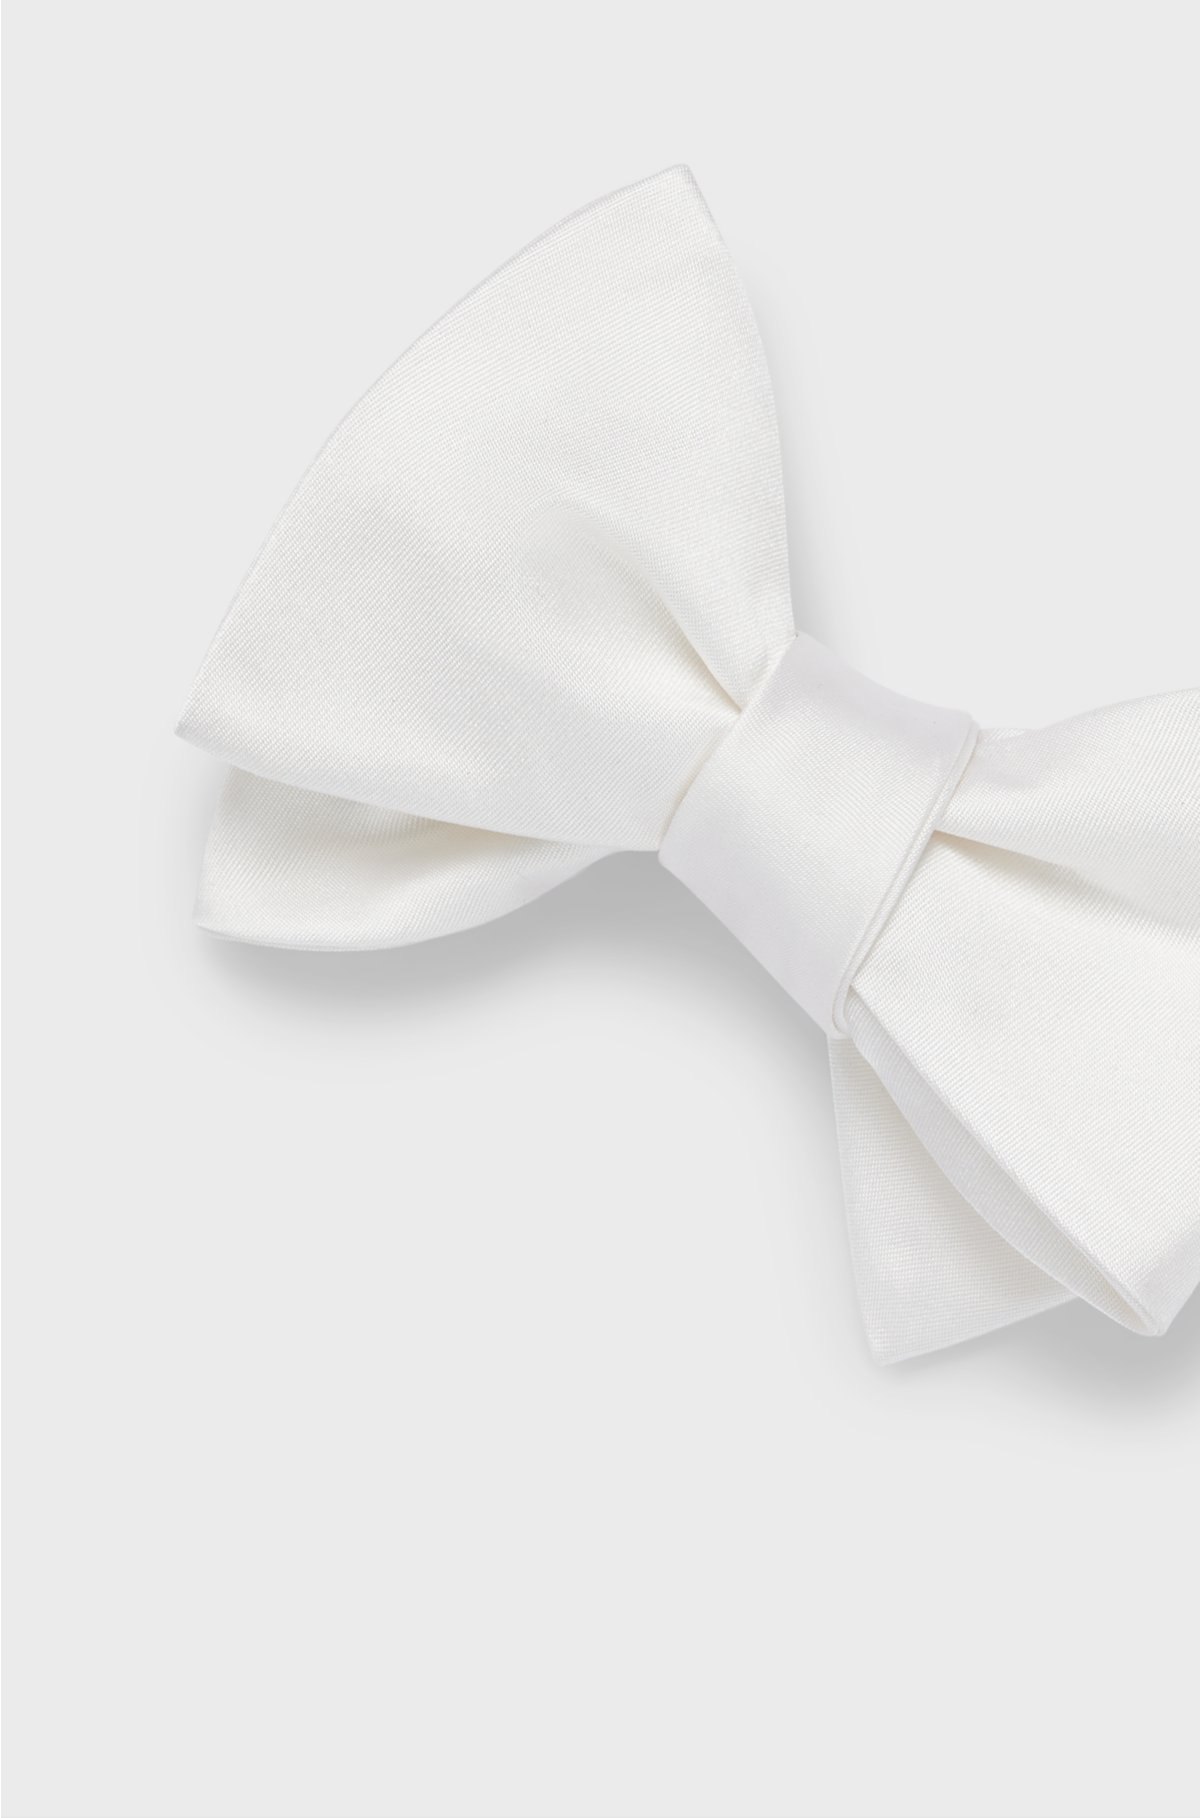 Self-tie bow tie in patterned silk jacquard, White